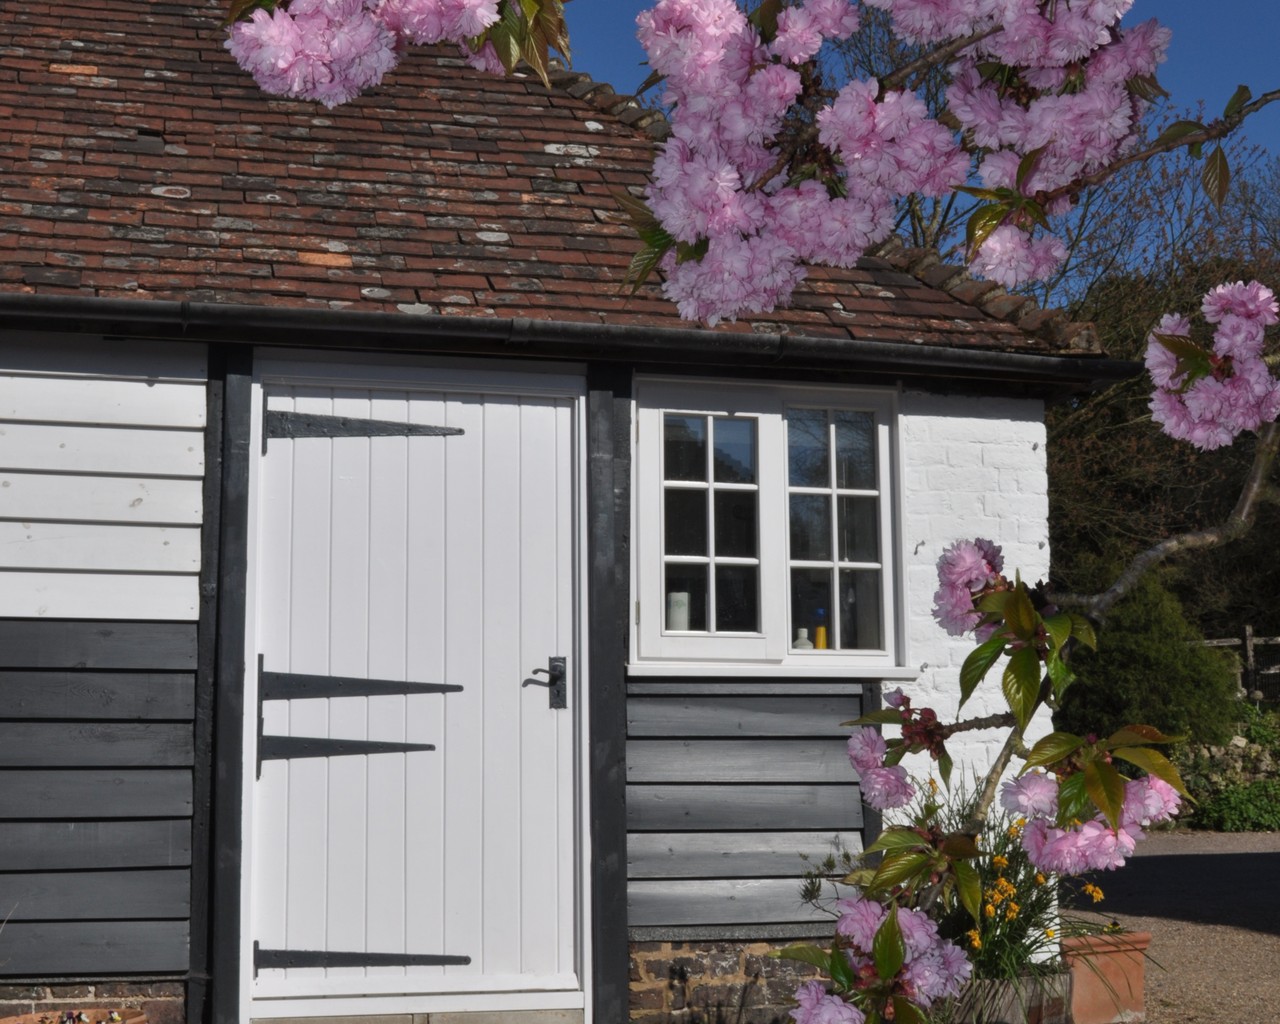 Dairy Cottage in spring_1280x1024